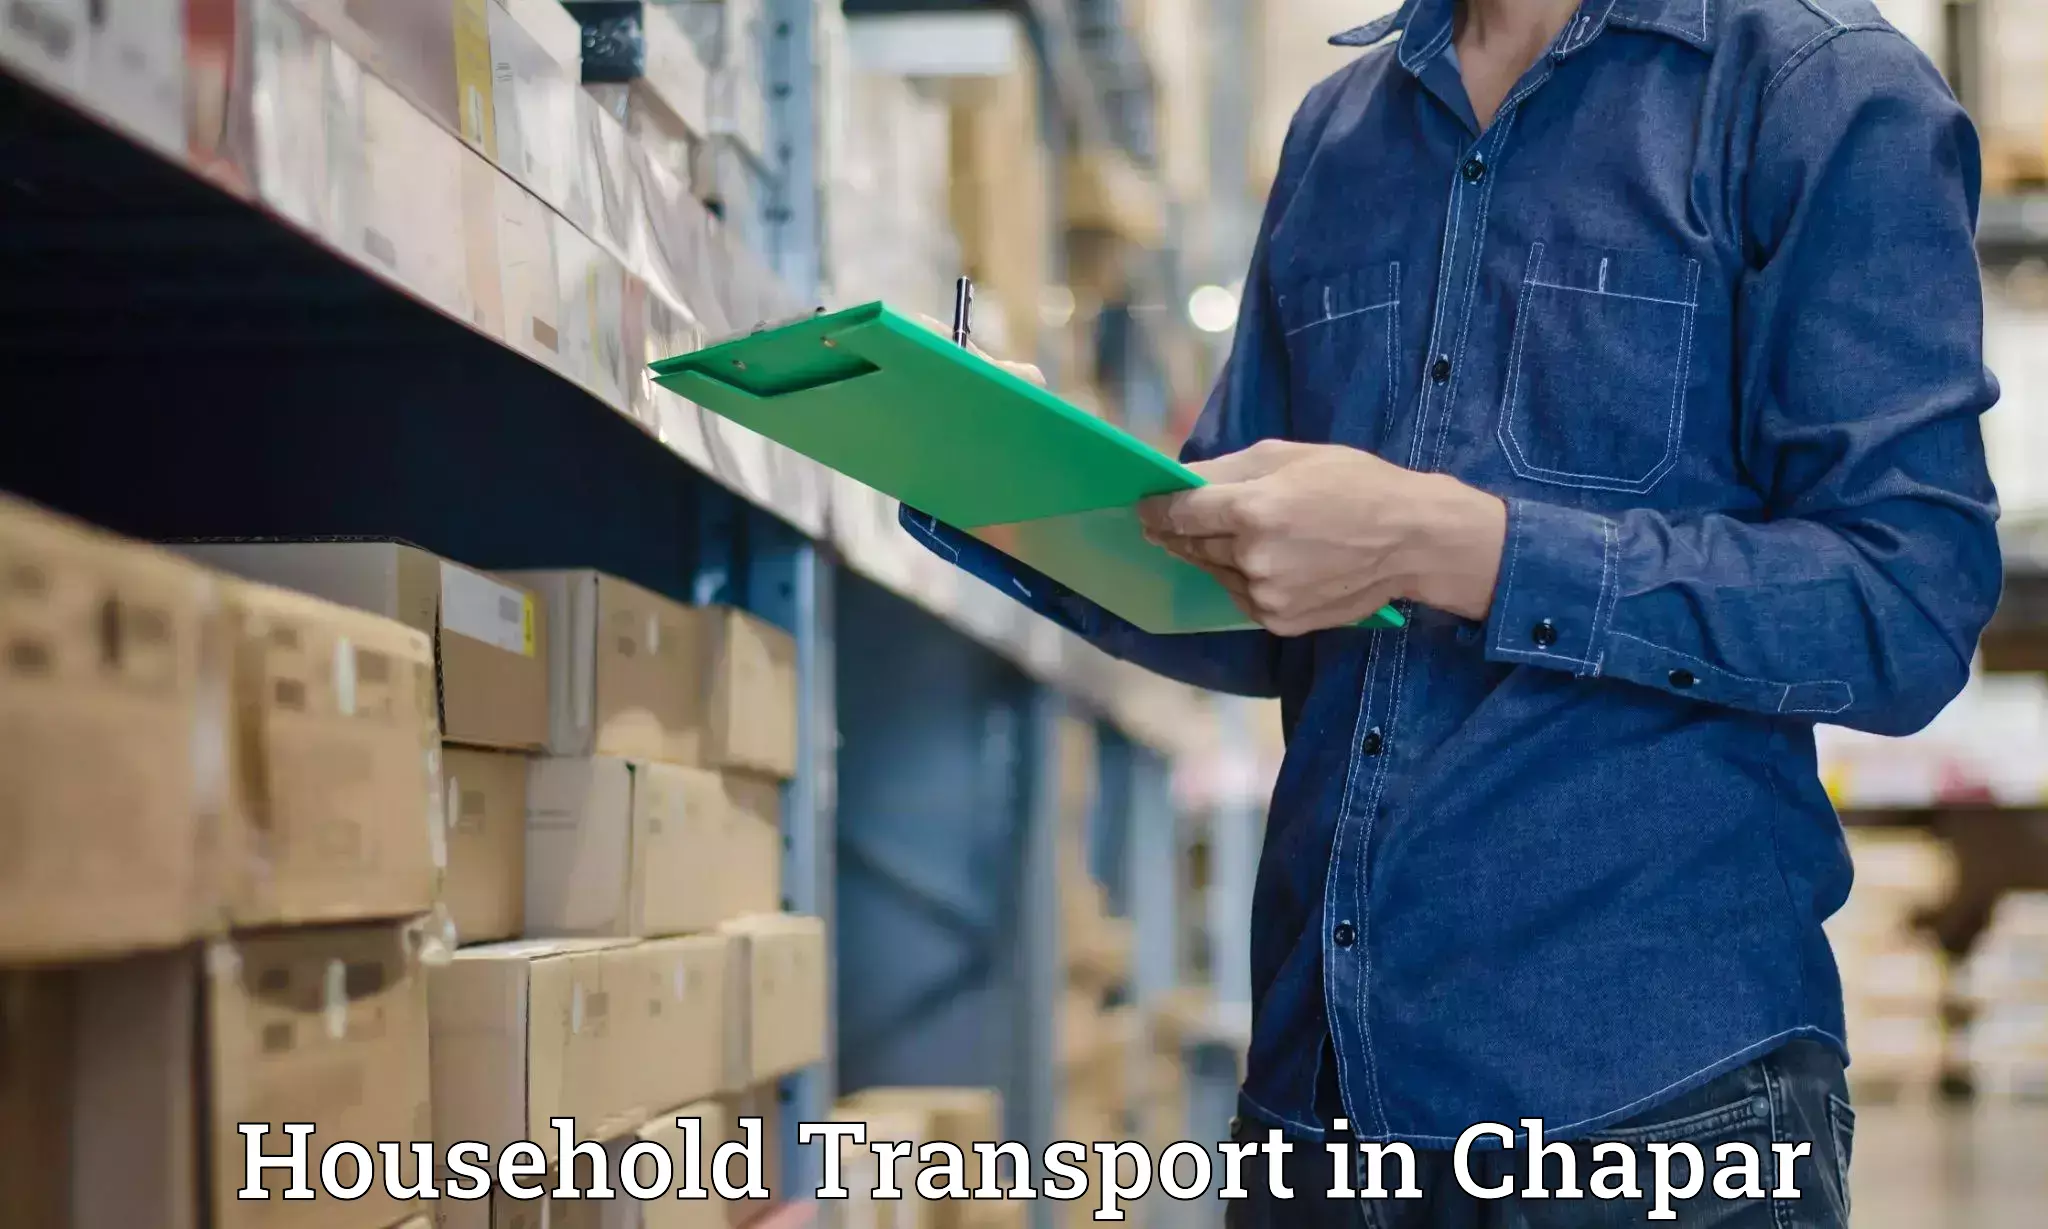 Household transport experts in Chapar